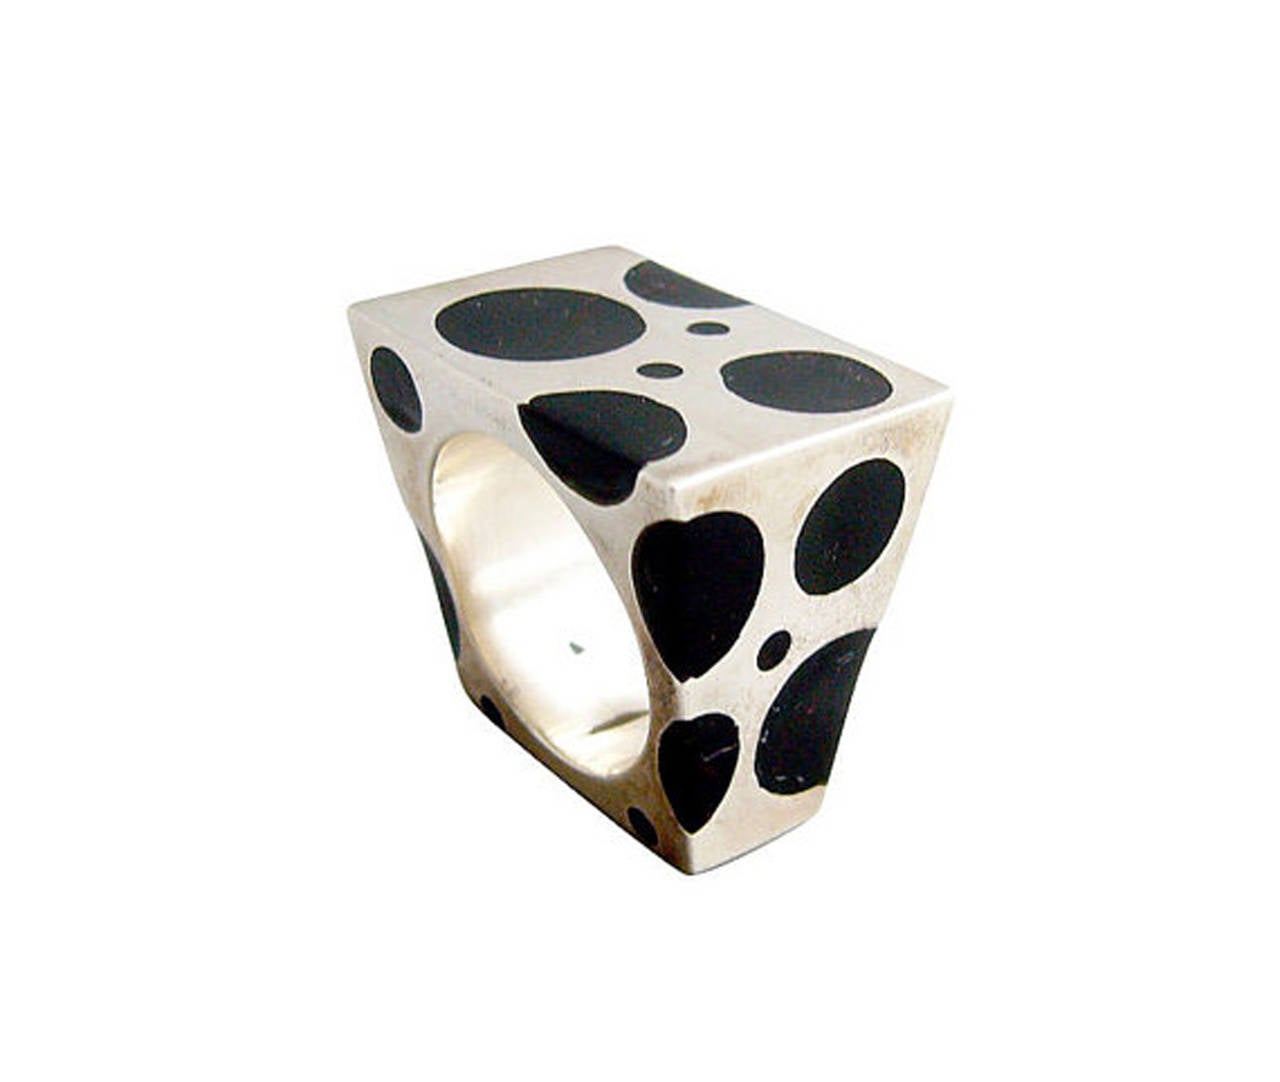 A sterling silver and enamel polka dot cube ring from Mexico, circa 1980's.  Face of the ring measures 1 1/8